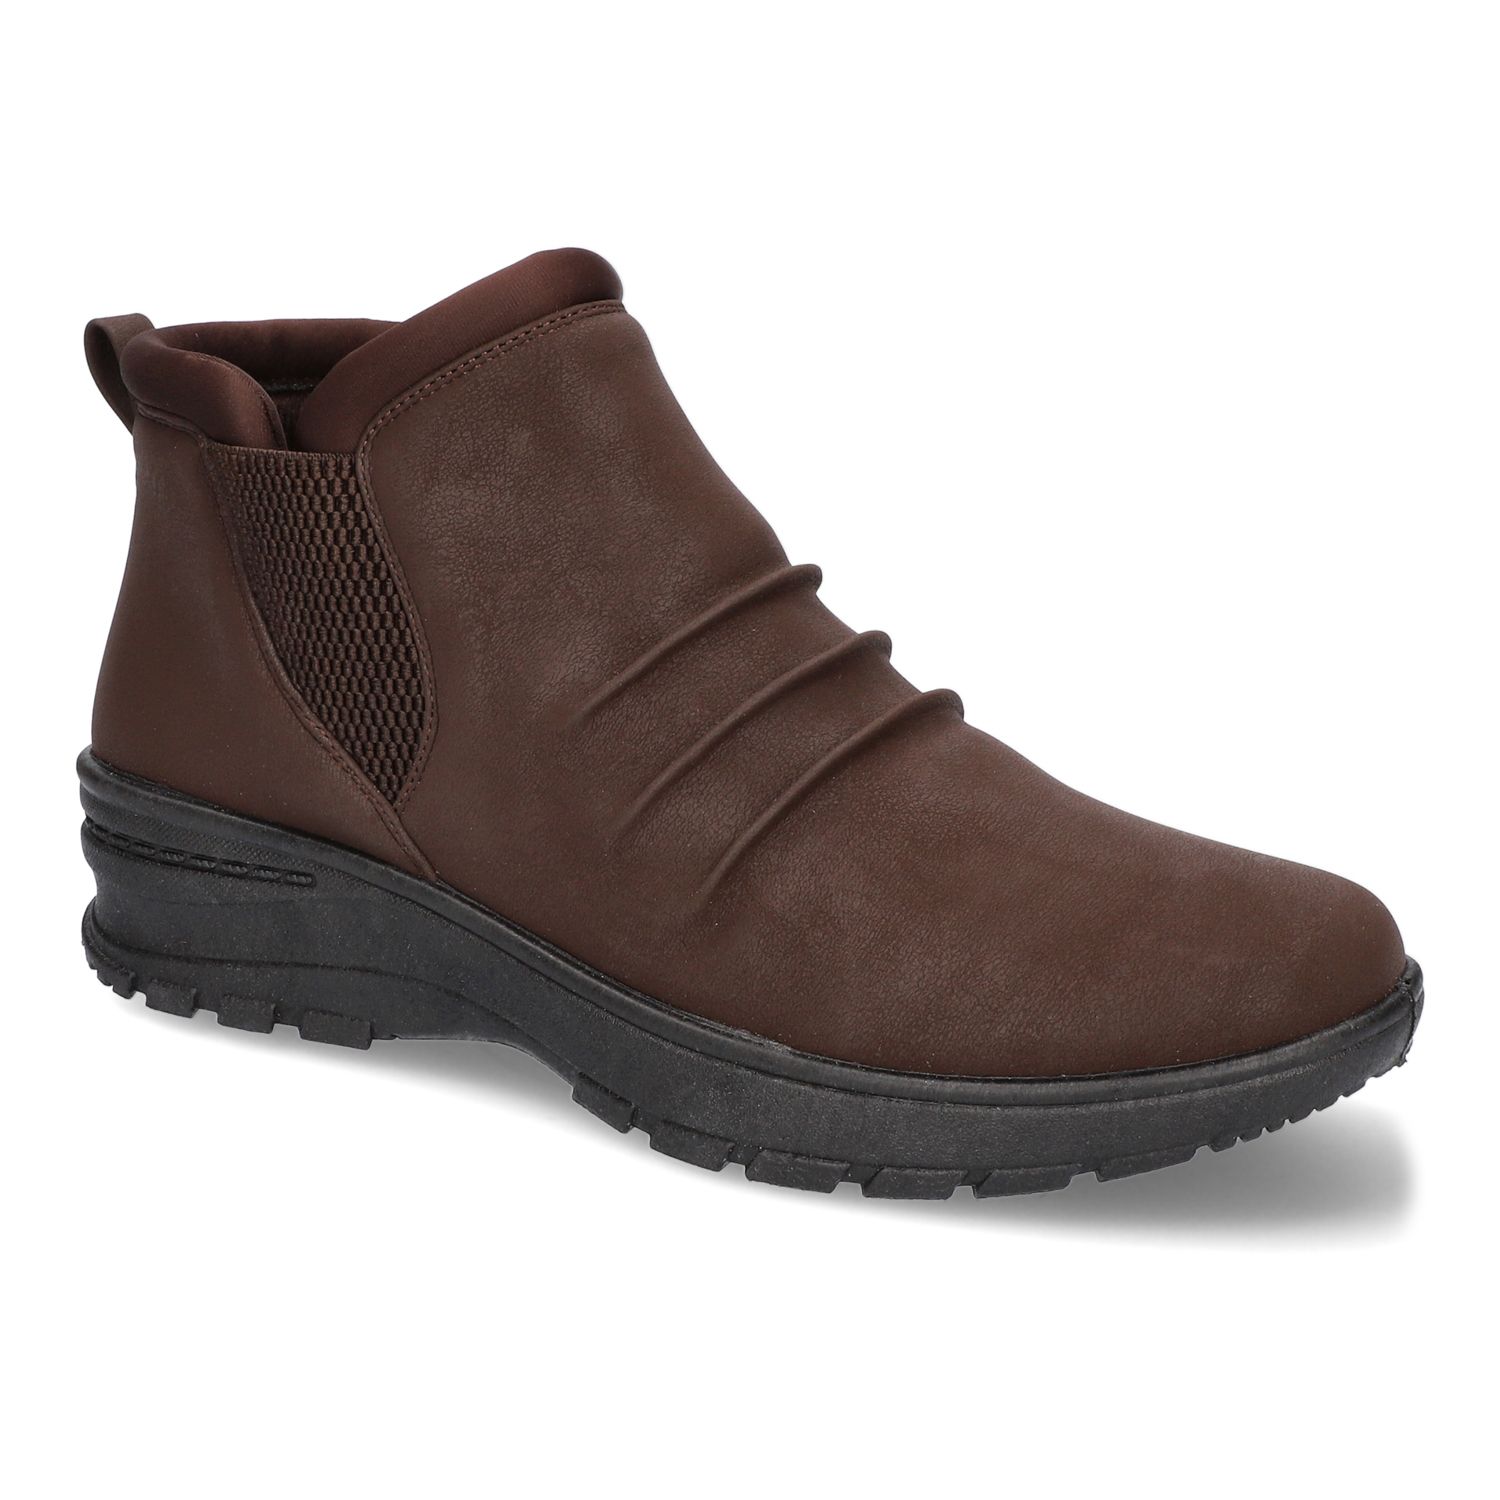 Image for Easy Street Savita Women's Ankle Boots at Kohl's.